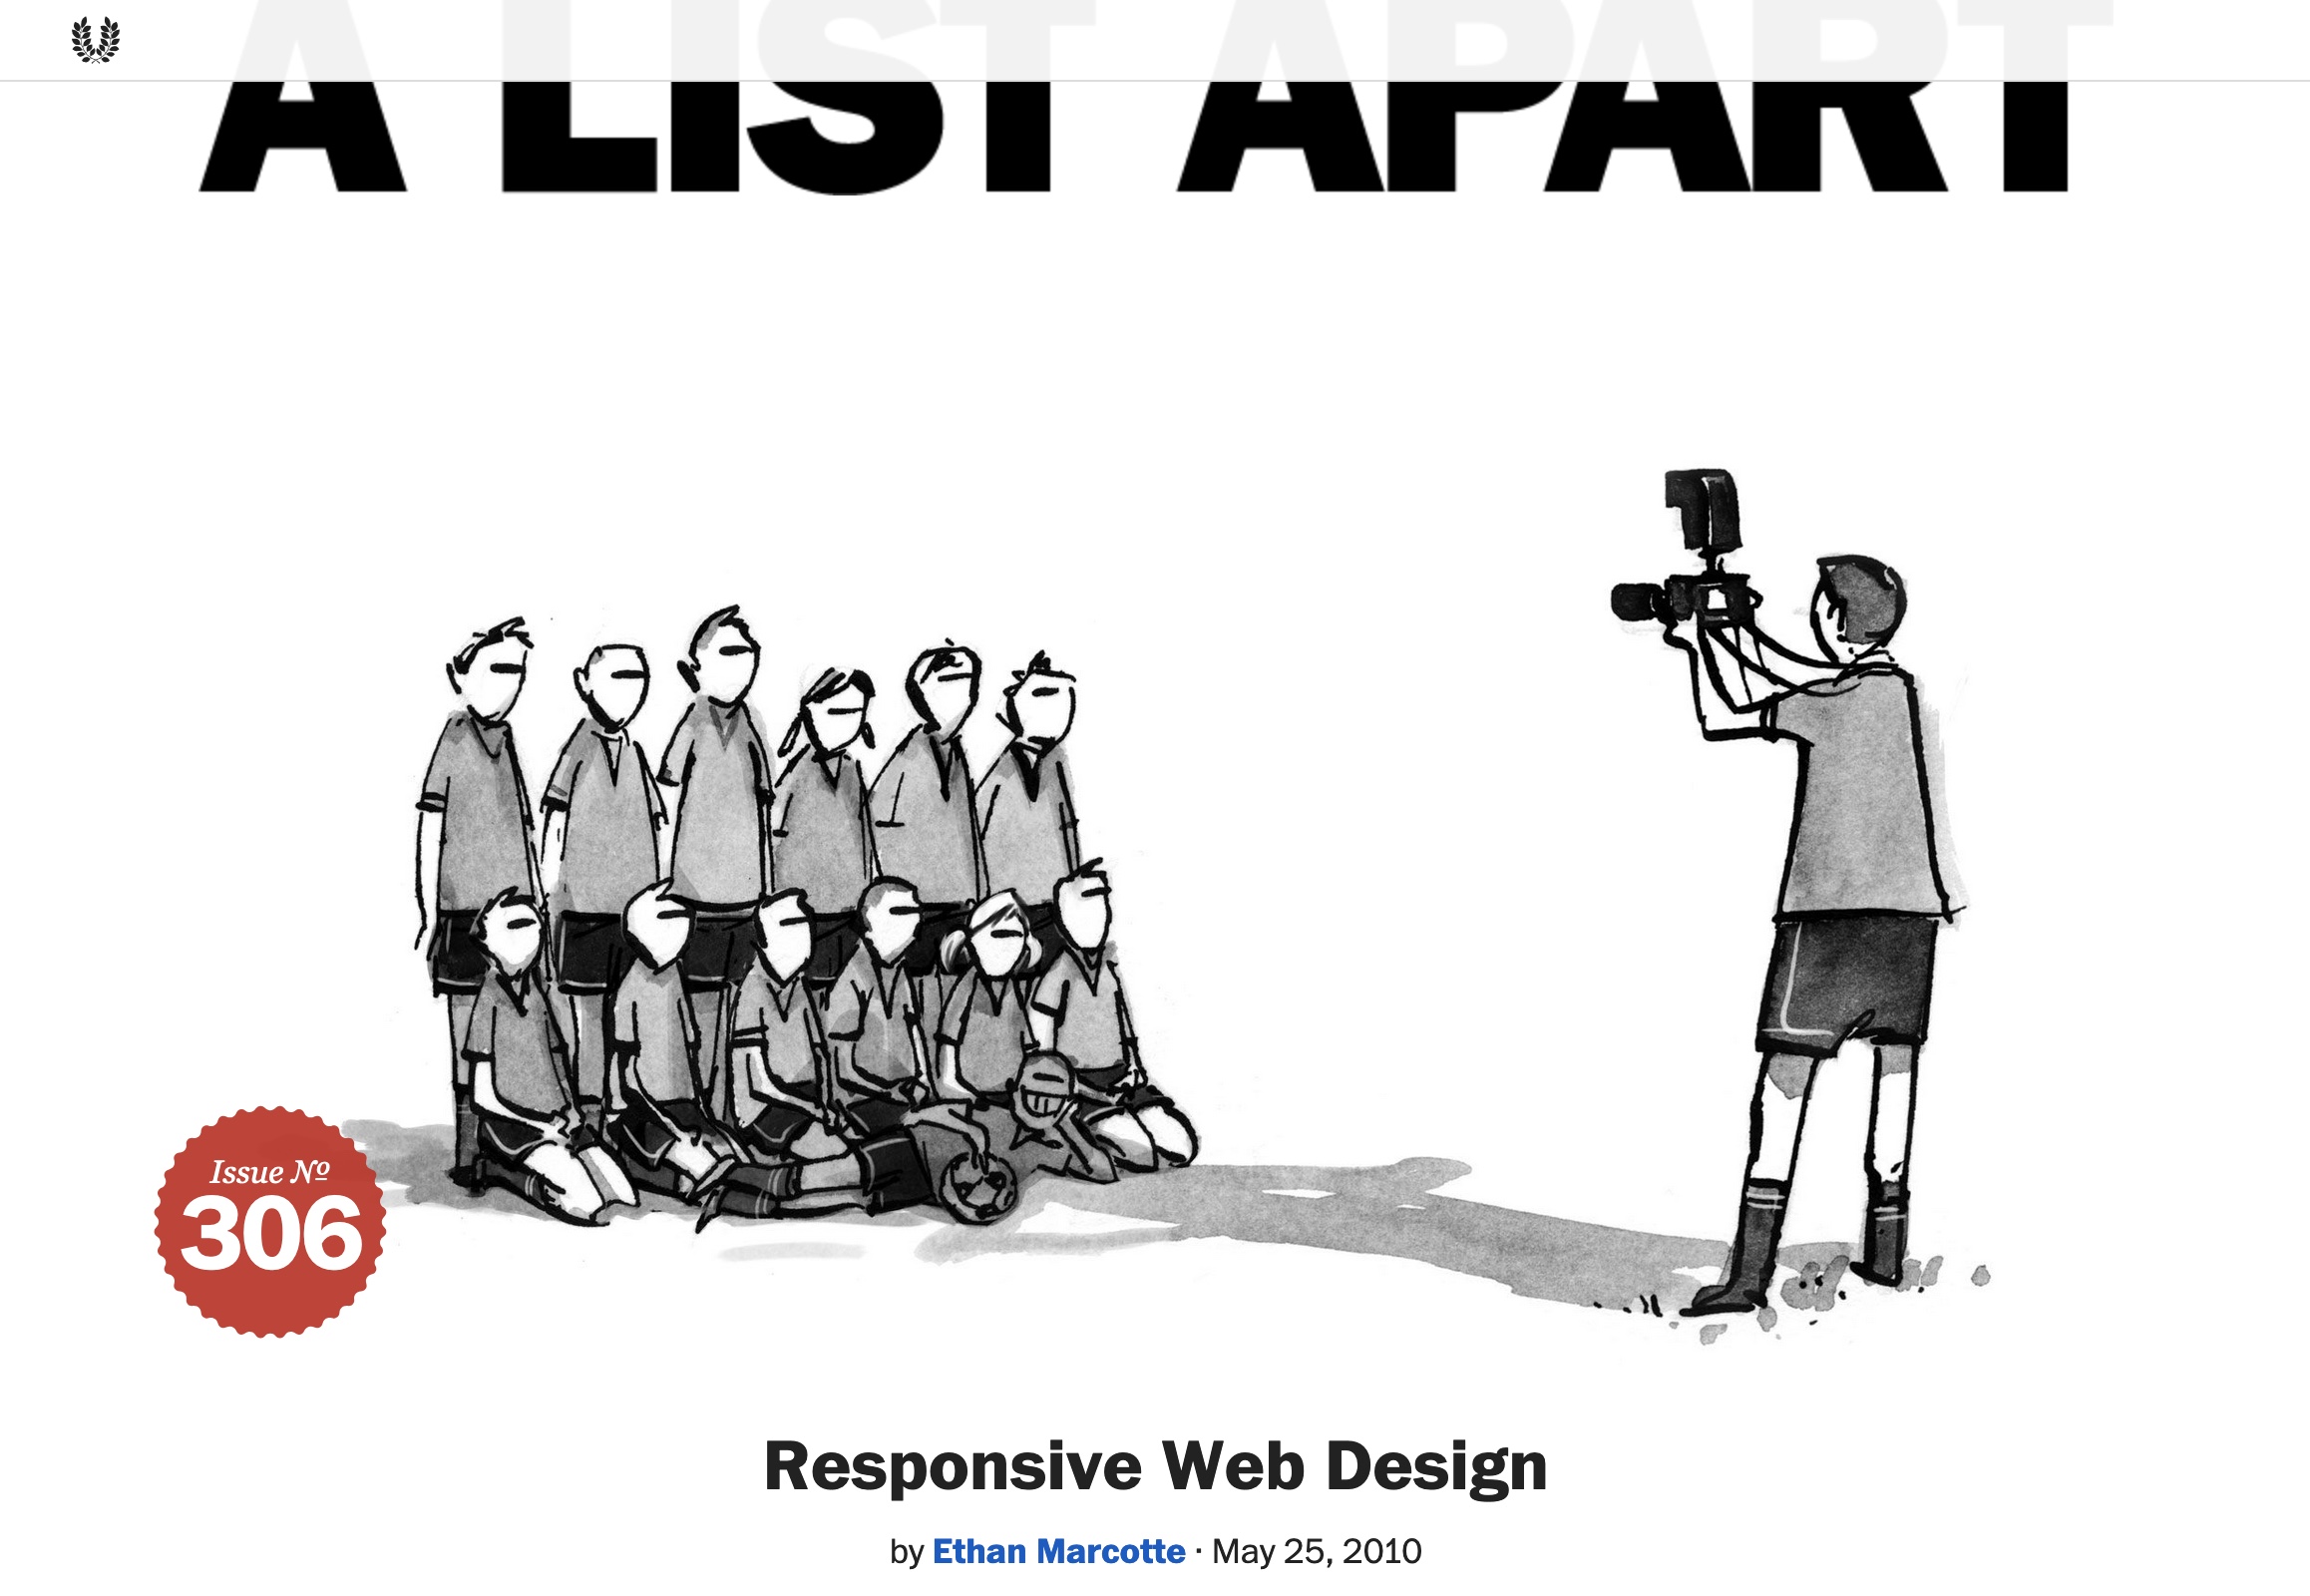 A List Apart:
Responsive Web Design
by Ethan Marcotte (May 25, 2010)
